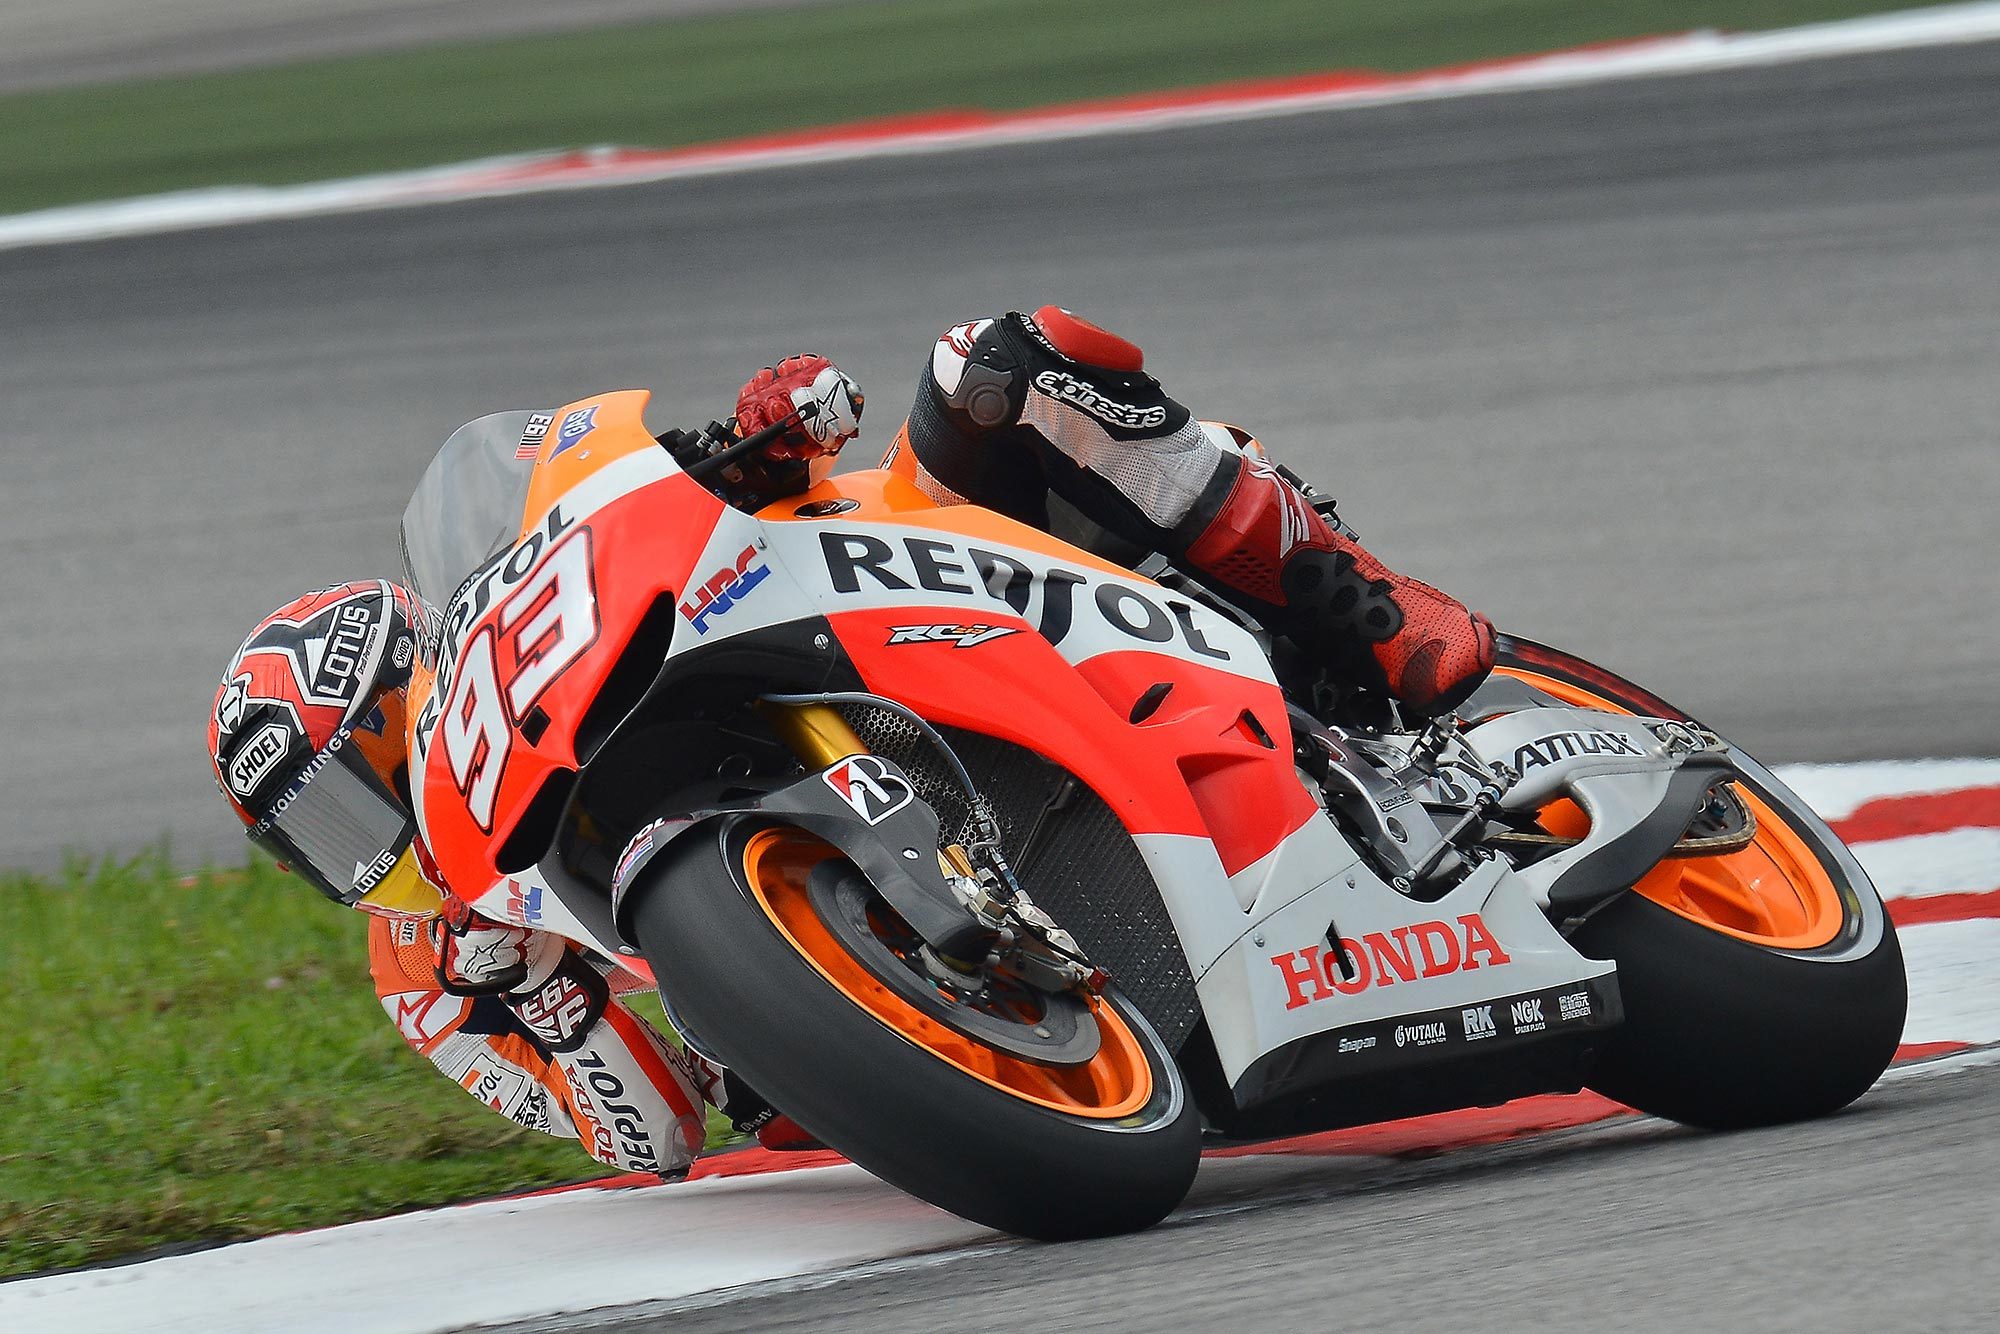 On 12 July 2012, it was announced that Márquez had signed a two-year contract with the Repsol Honda team in MotoGP, replacing the retiring Casey Stoner alongside Dani Pedrosa, from 2013 onwards